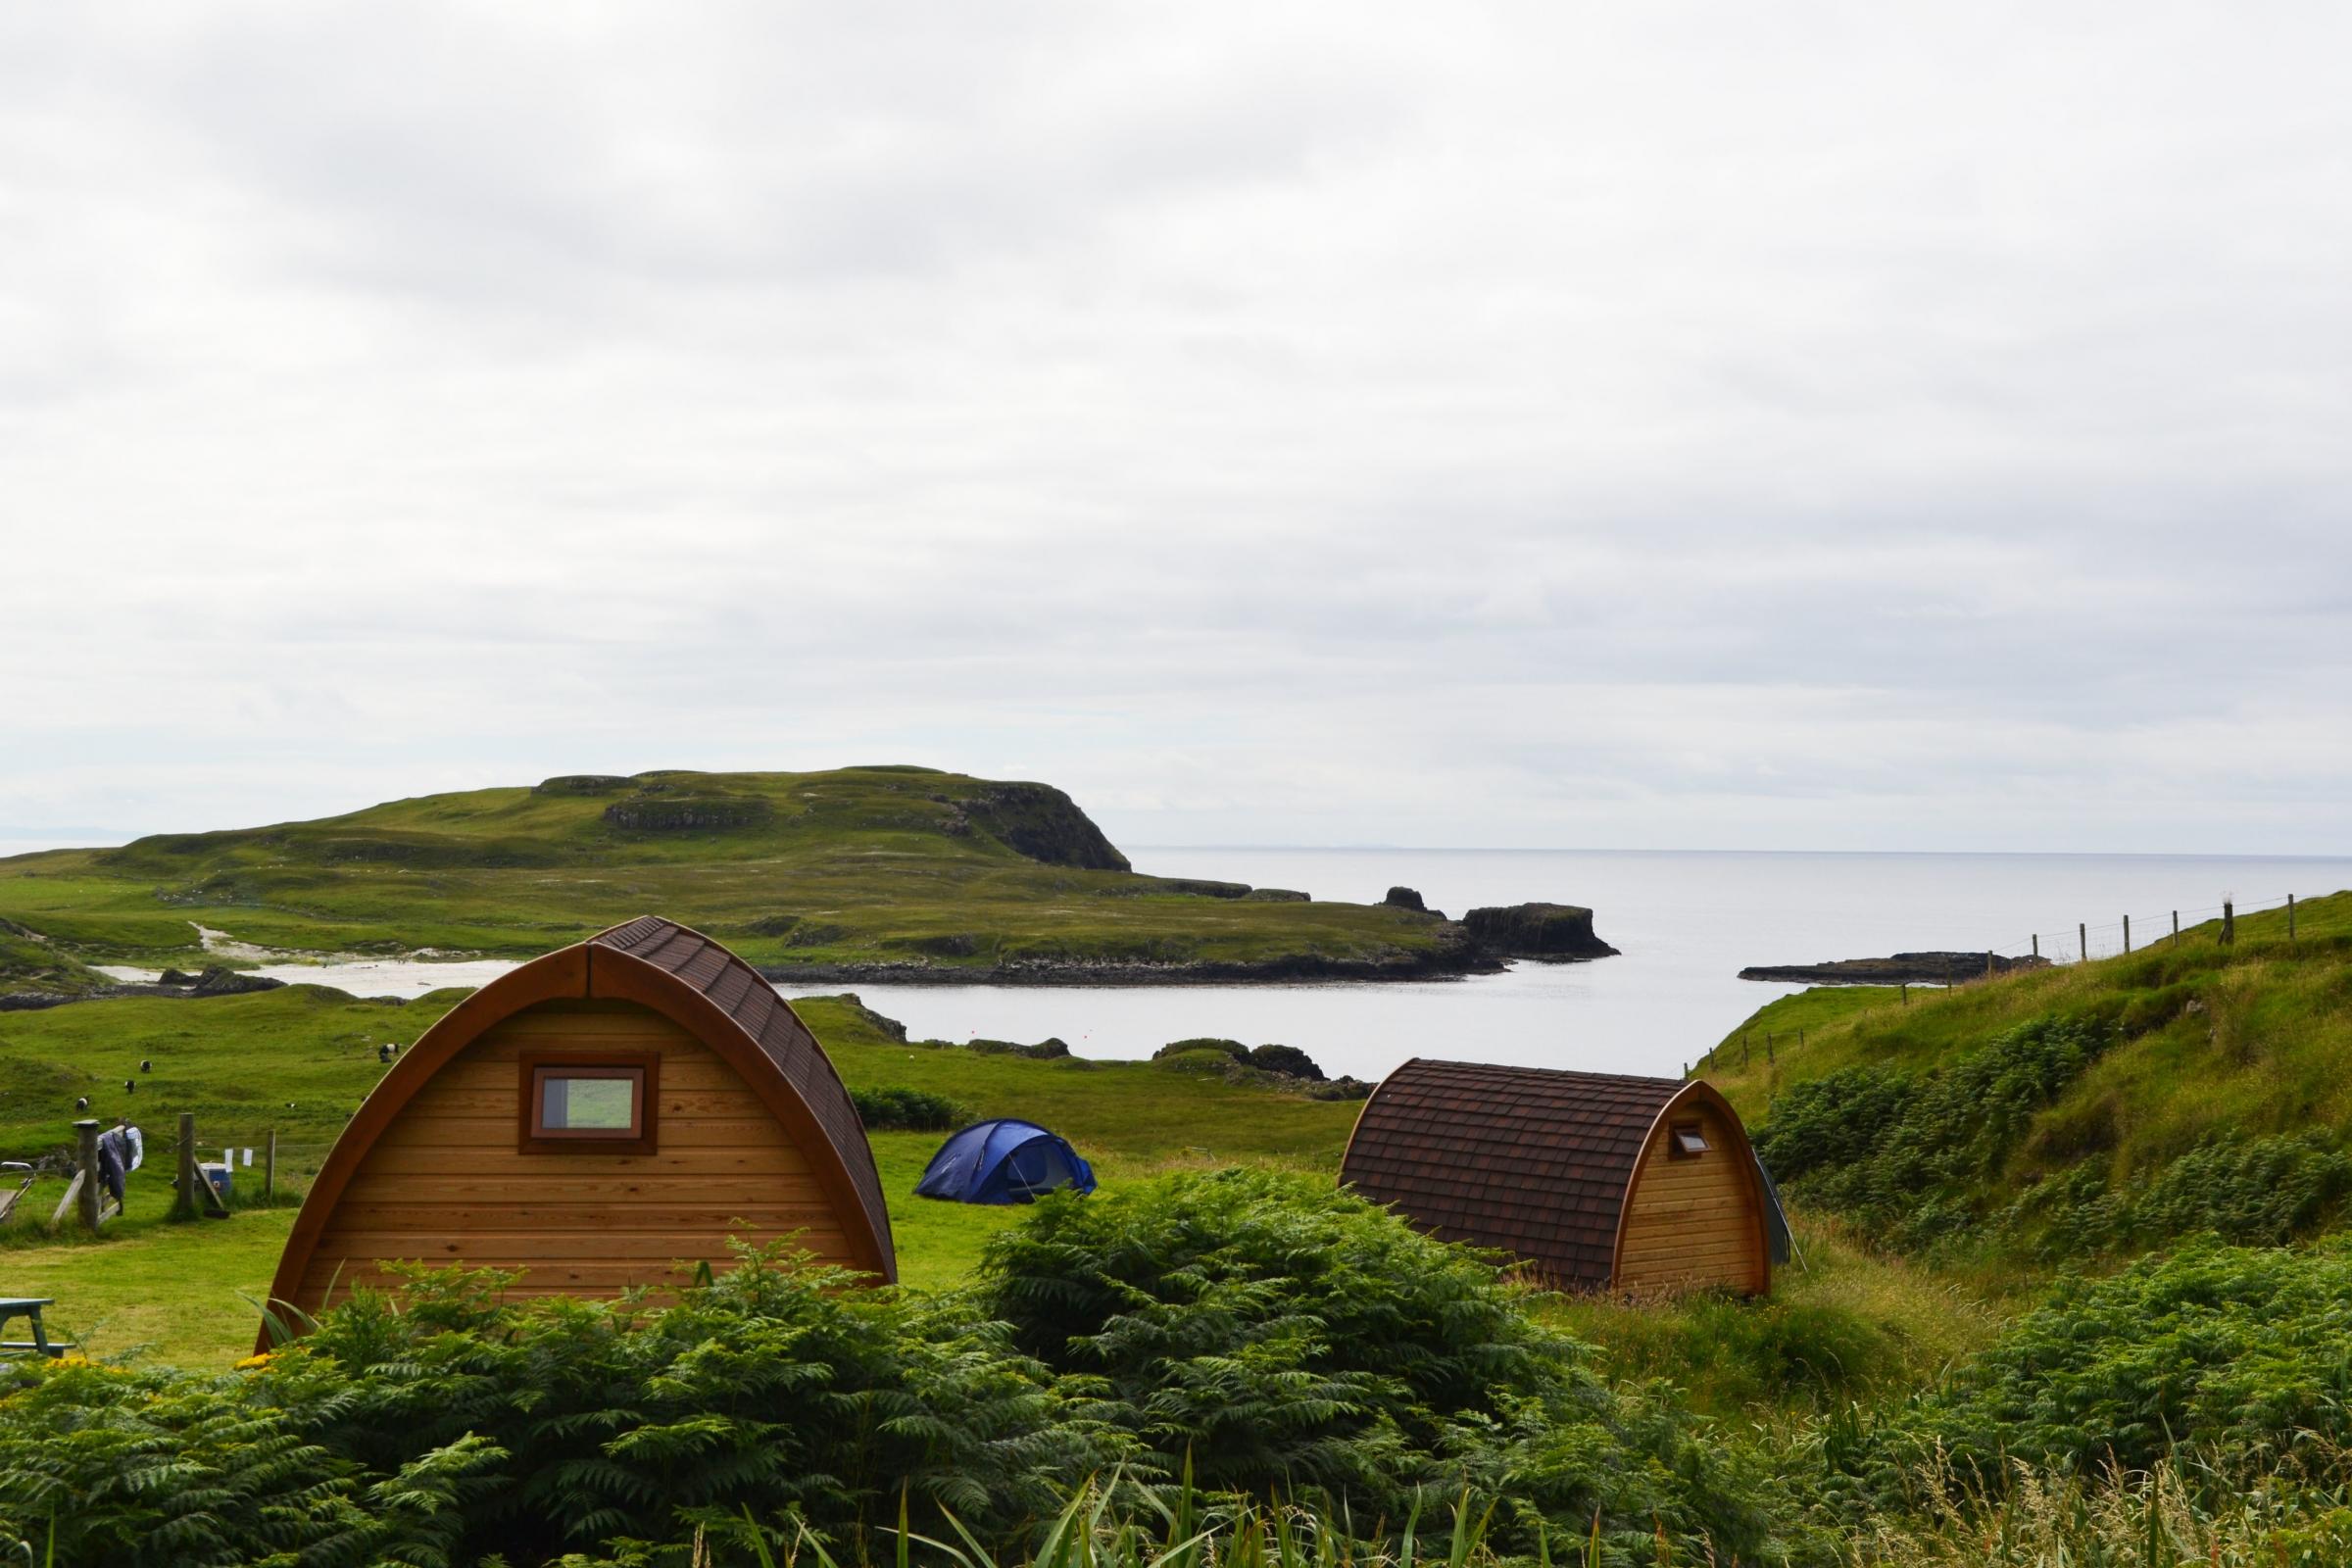 Canna Campsite is due to reopen at the end of April. Photo by Graficanna.